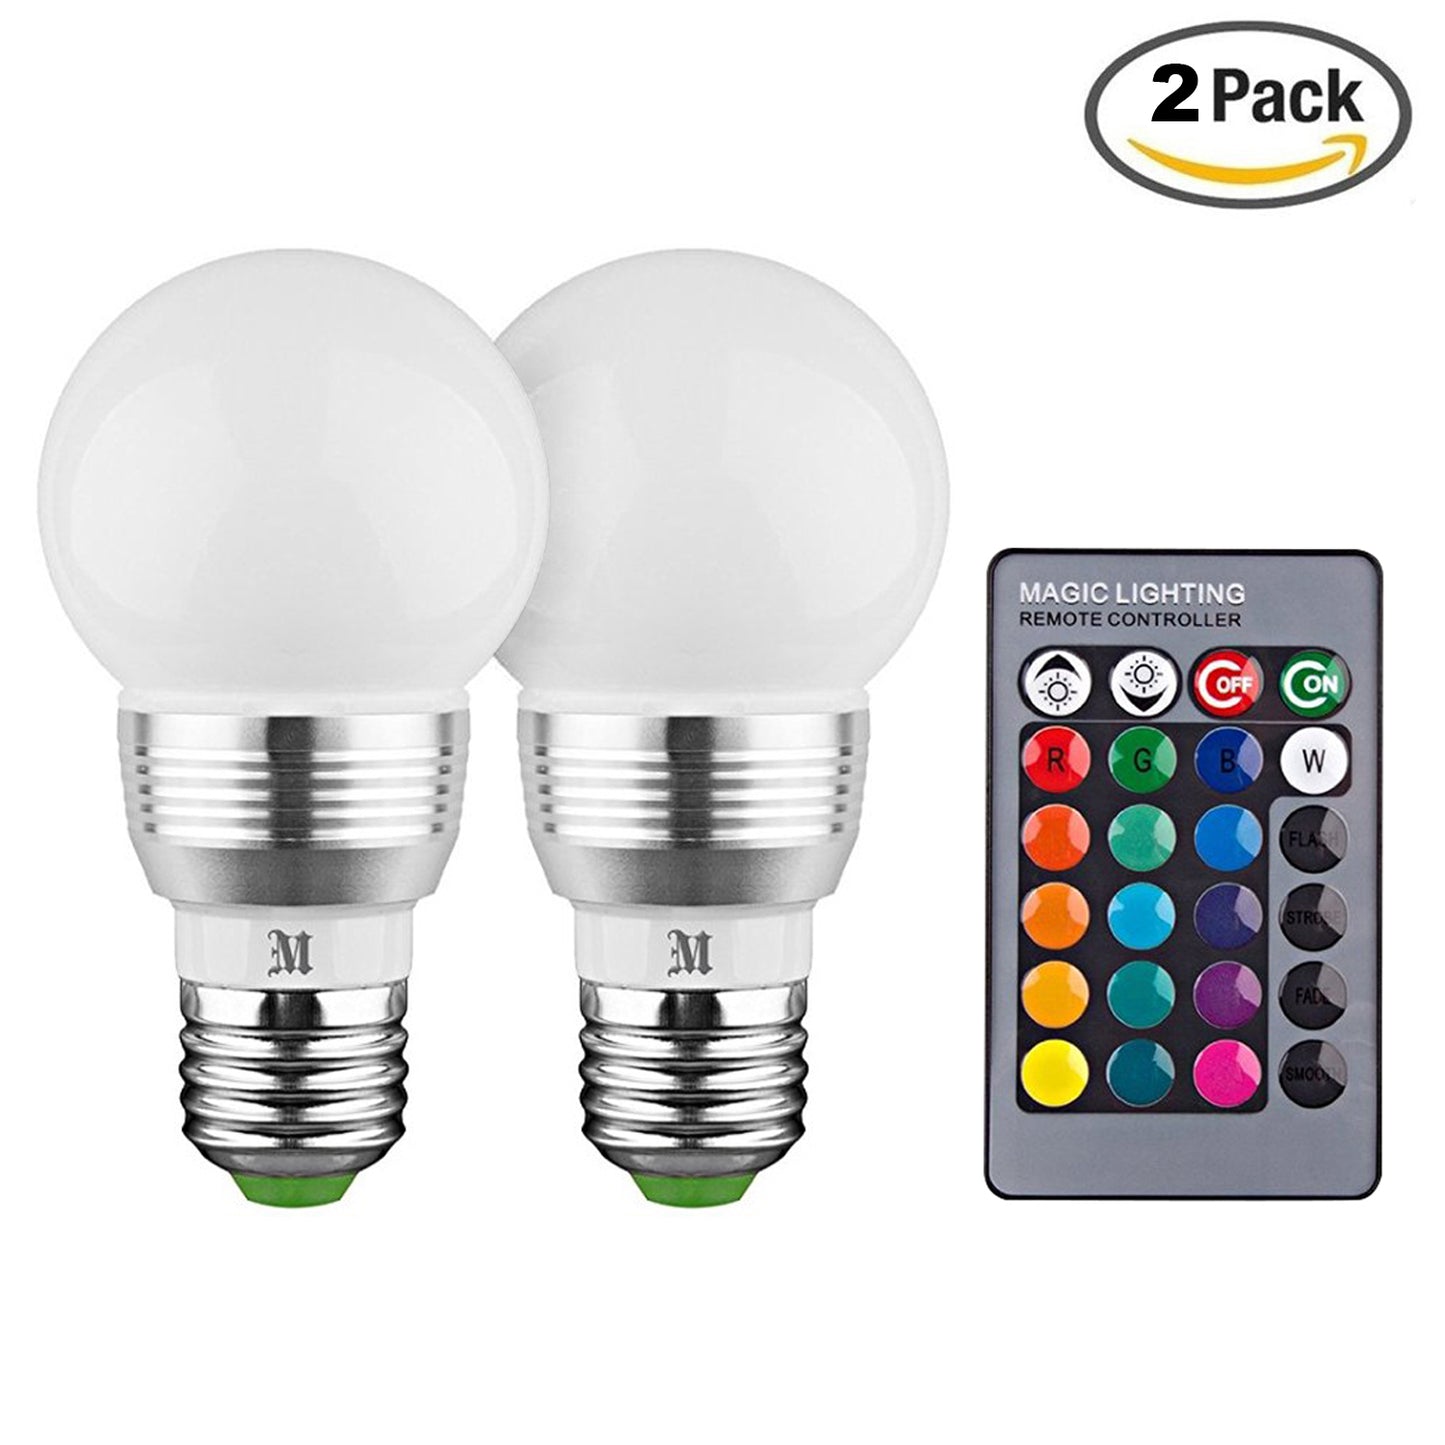 KOBRA LED Bulb Color Changing Light Bulb with Remote Control (2 Pack)16 Different Color Choices Smooth, Flash or Strobe Mode- Premium Quality & Energy Saving Retro LED Lamp